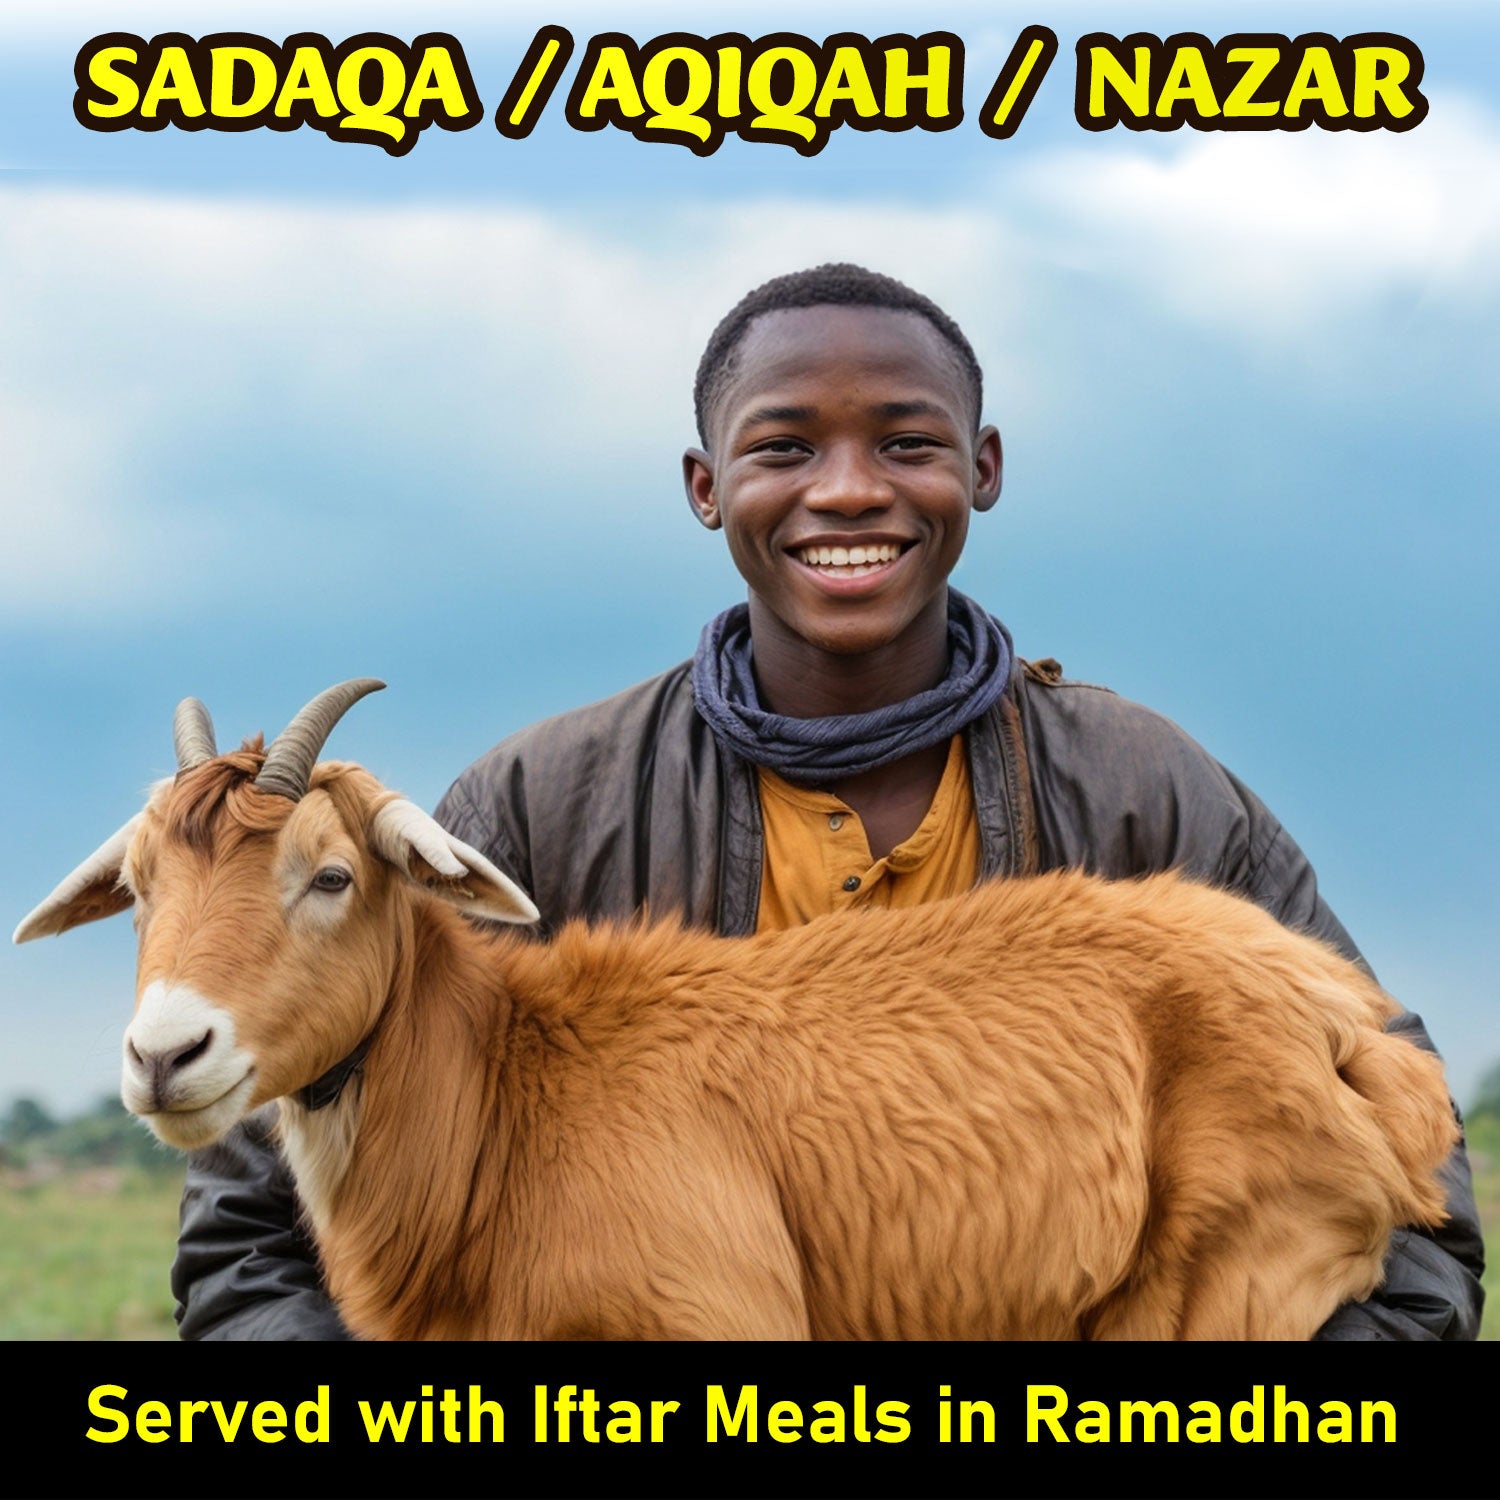 Goats for Iftar in Nigeria